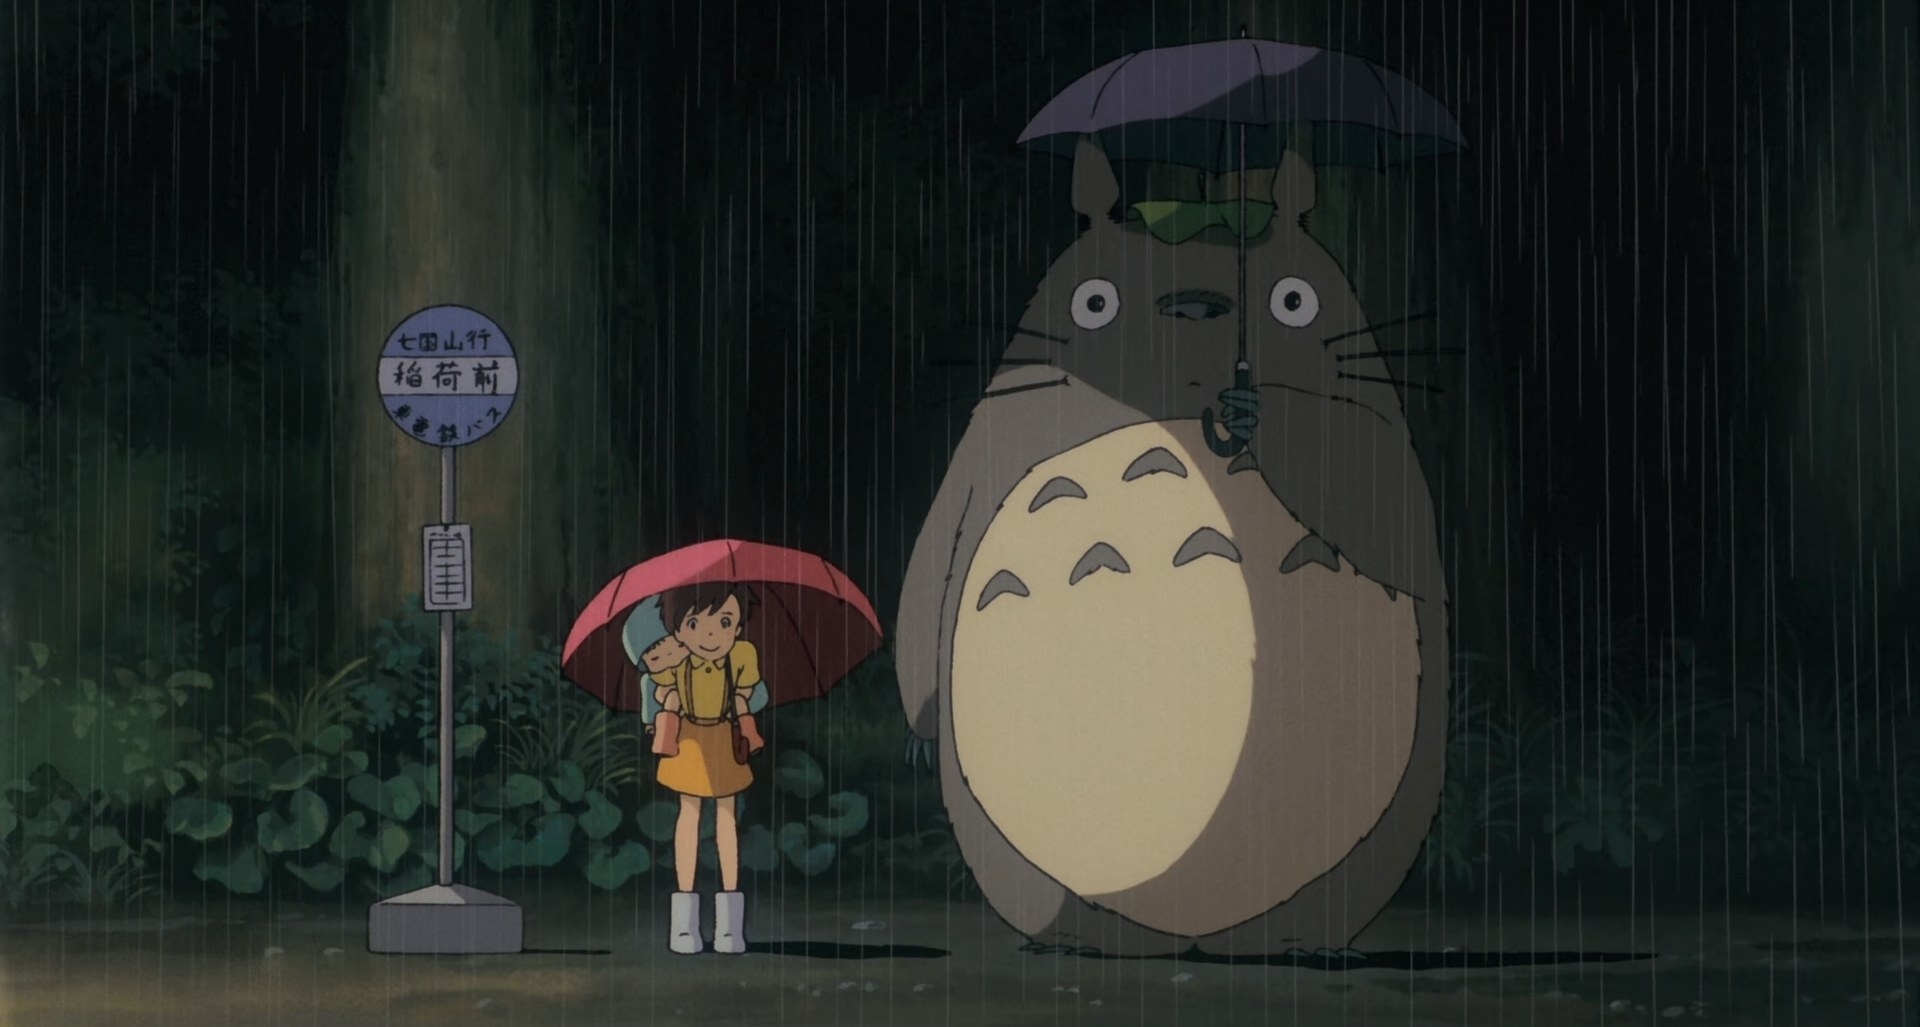 15 Studio Ghibli Characters That Are Absolutely Iconic